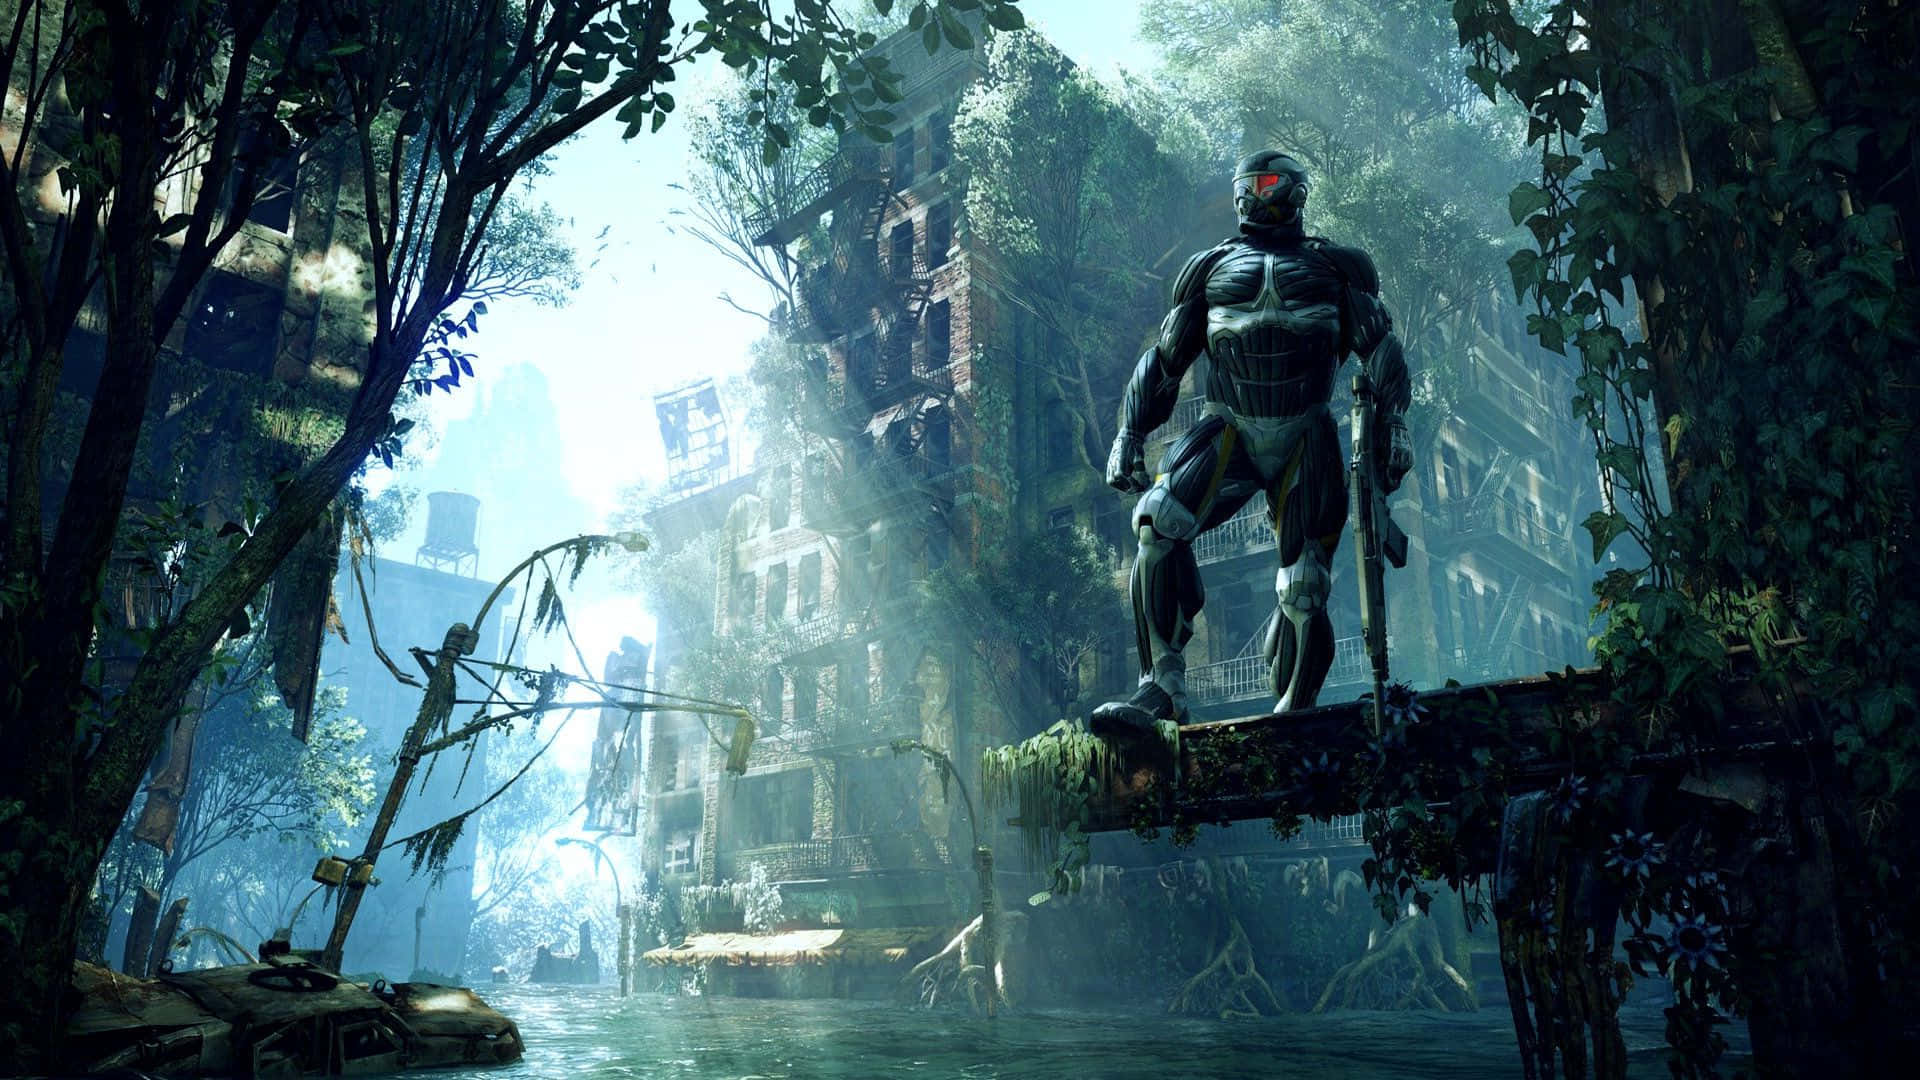 Image  One lonely soldier stands, amidst the ruin of Crysis 3's City. Wallpaper